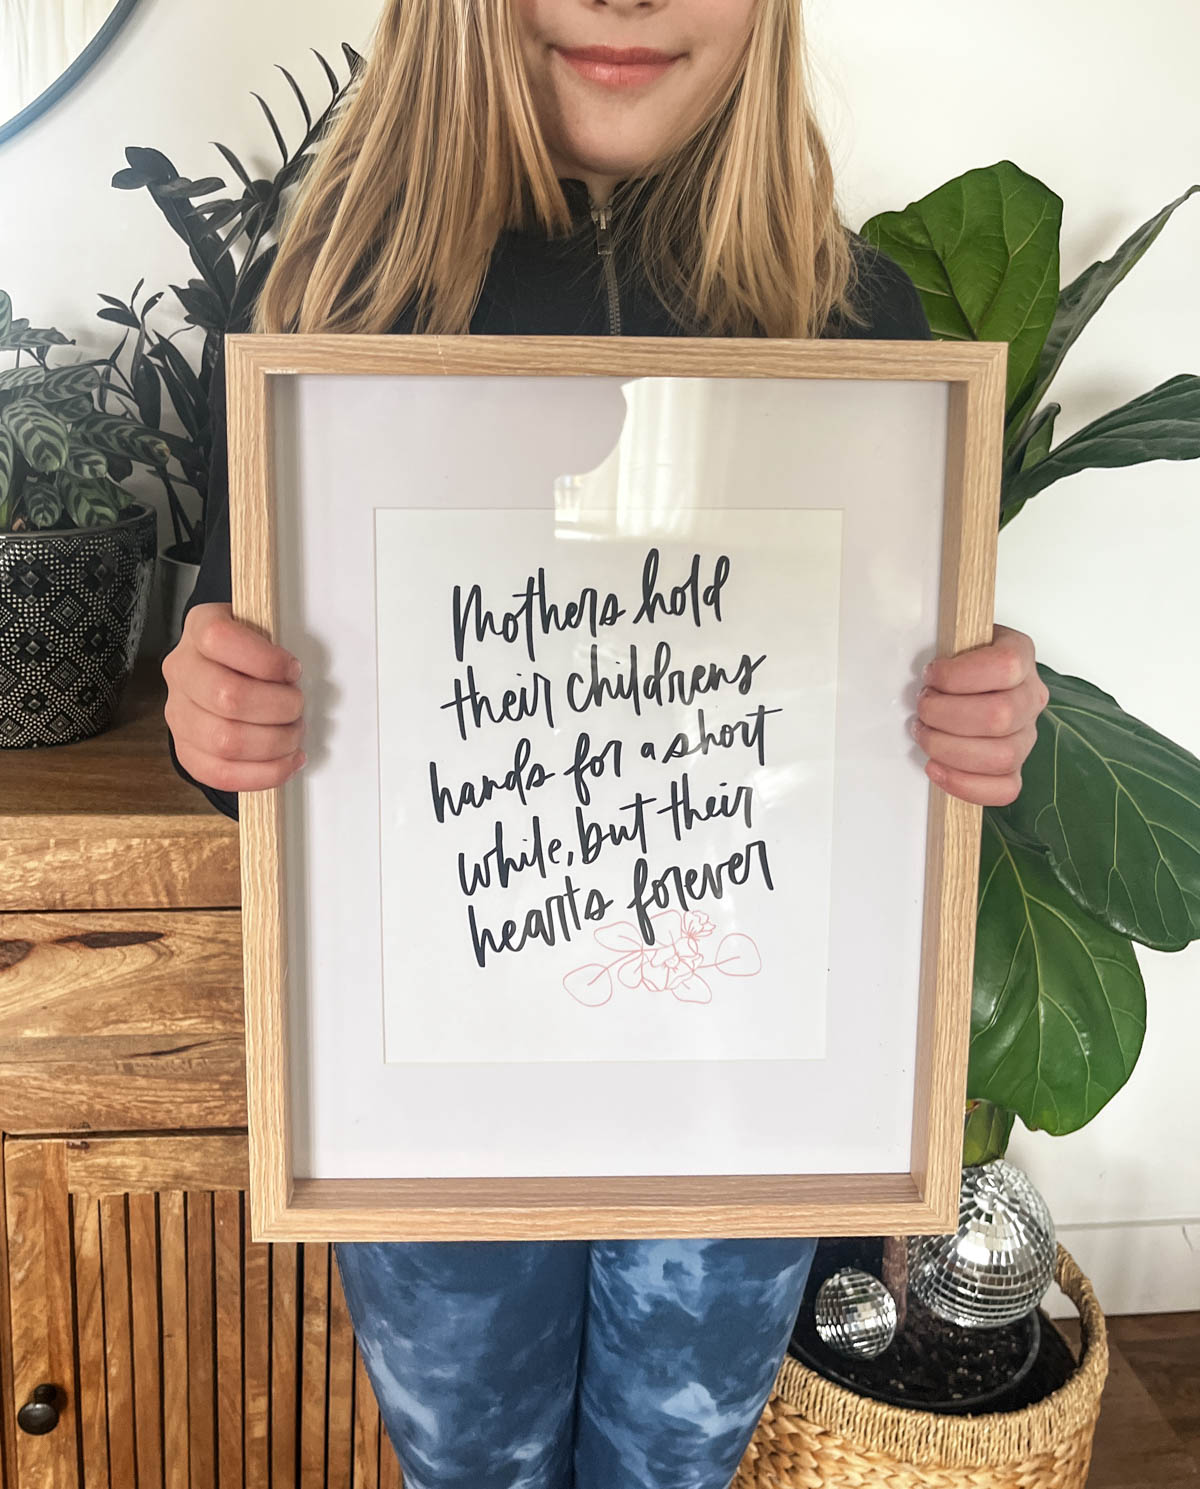 hand lettered quote about motherhood framed in a light wood picture frame. Girl holding it as a gift.